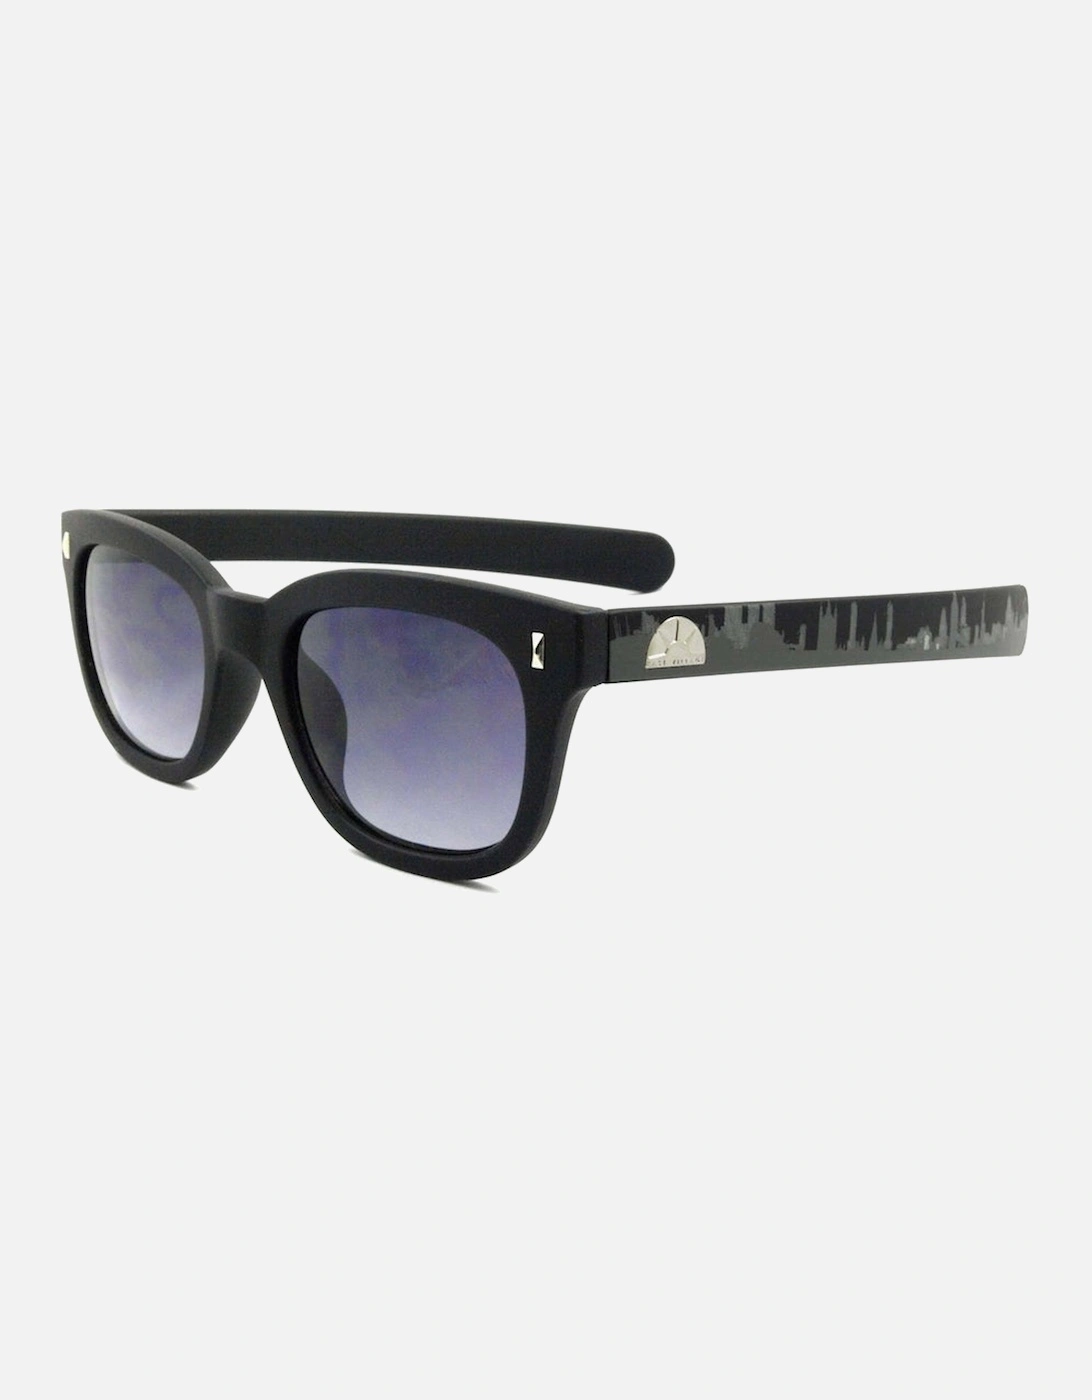 Plastic 'Pacino' Sunglasses In Black With London Skyline Printed On Temples, 2 of 1